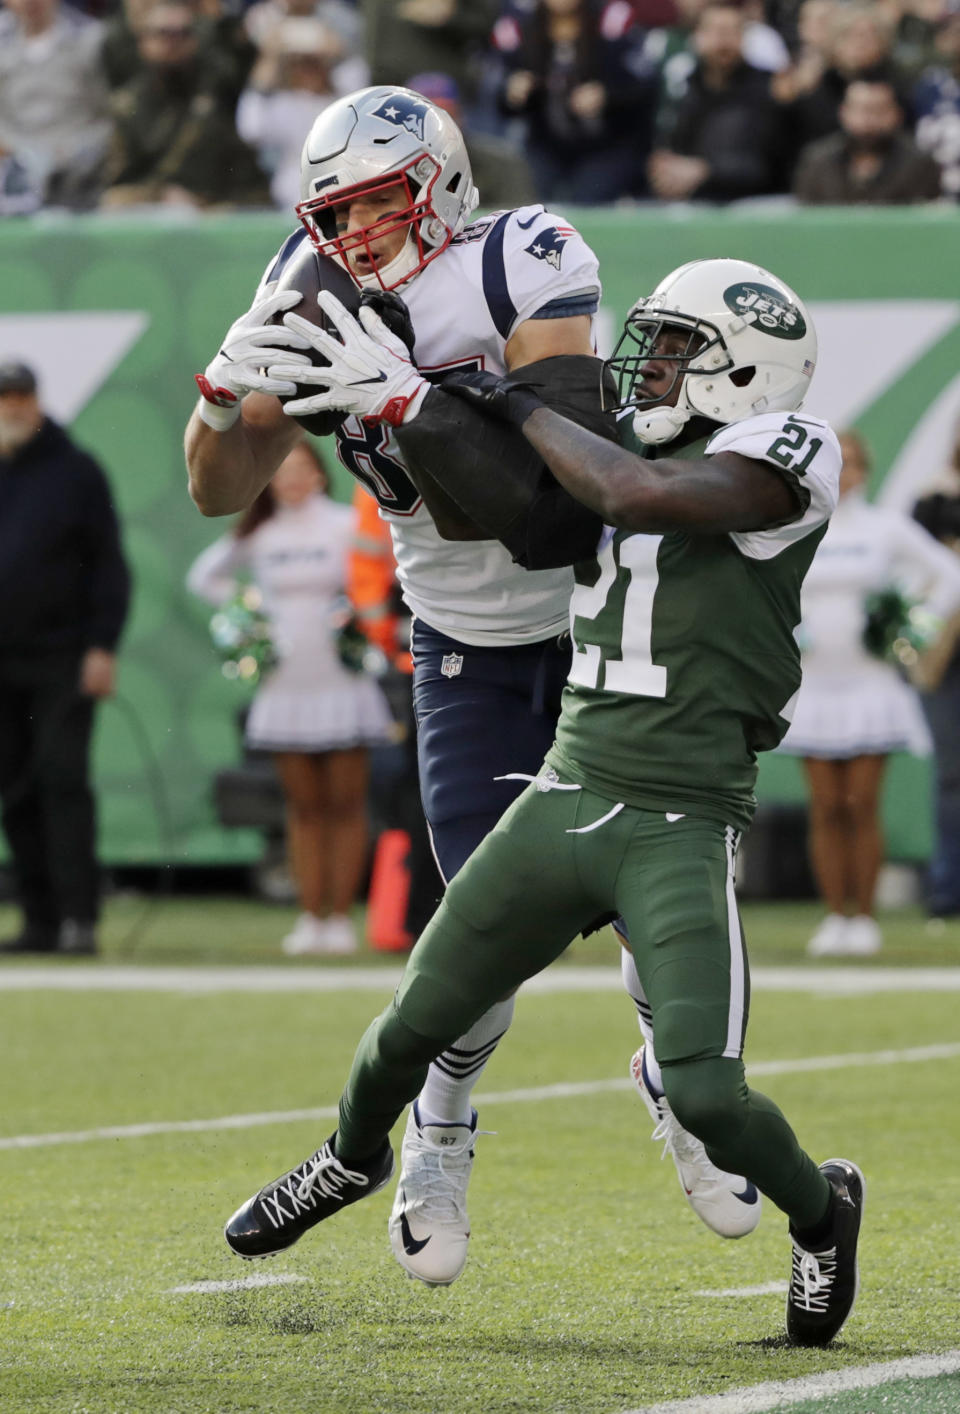 New York Jets cornerback Morris Claiborne (21) defends New England Patriots' Rob Gronkowski (87) during the first half of an NFL football game Sunday, Nov. 25, 2018, in East Rutherford, N.J. Gronkowski scored a touchdown on the play. (AP Photo/Bill Kostroun)